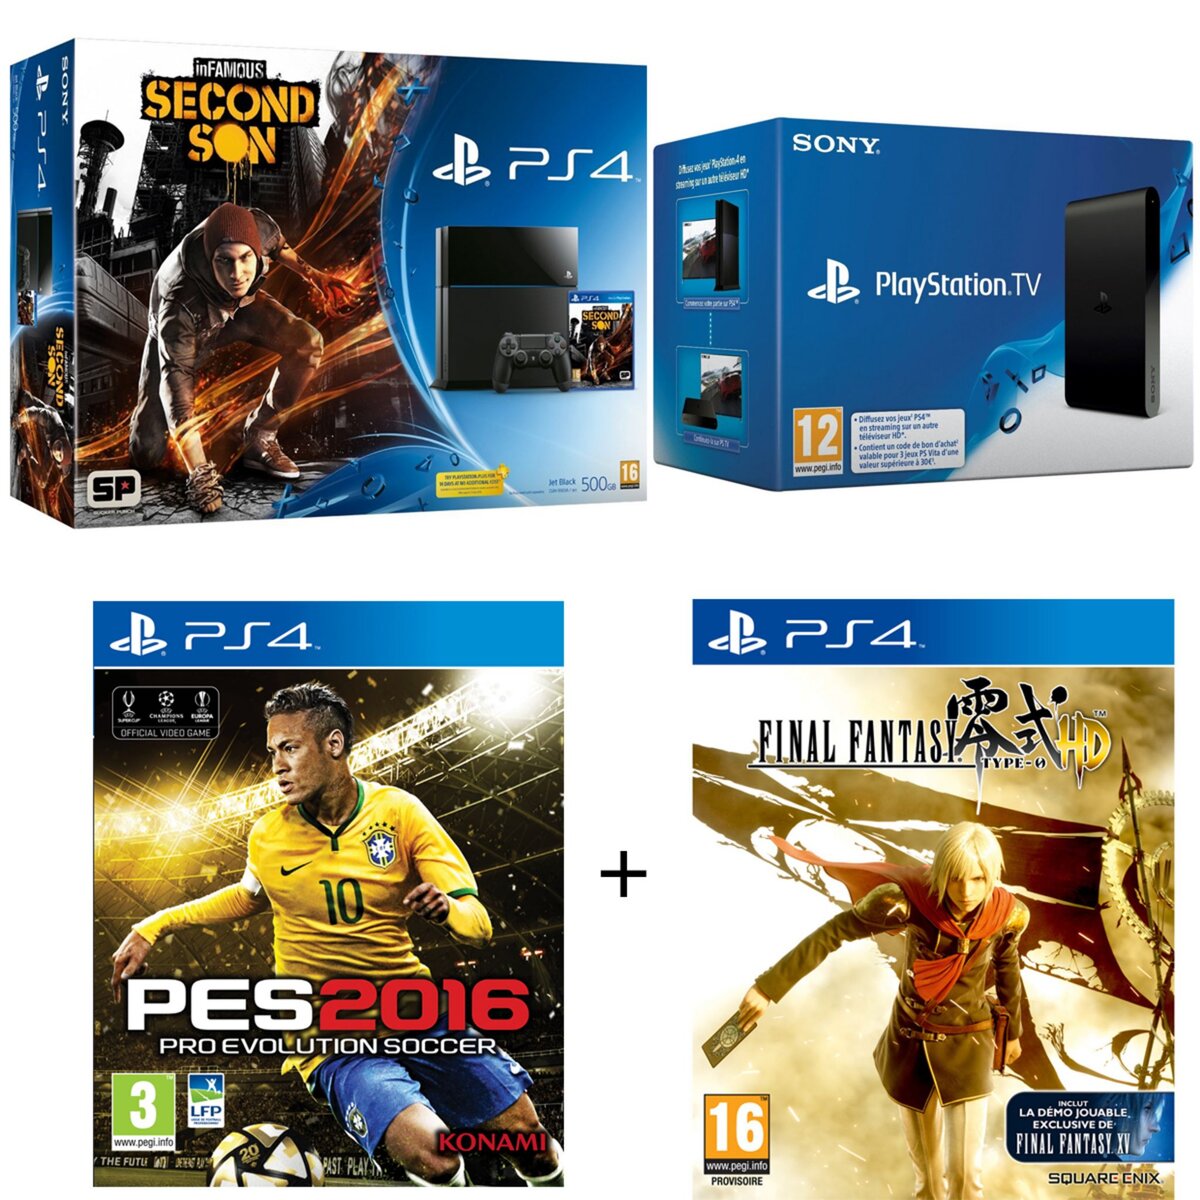 Console PS4 500 Go inFamous + Playstation TV + PES 2016 + Final Fantasy : Type 0